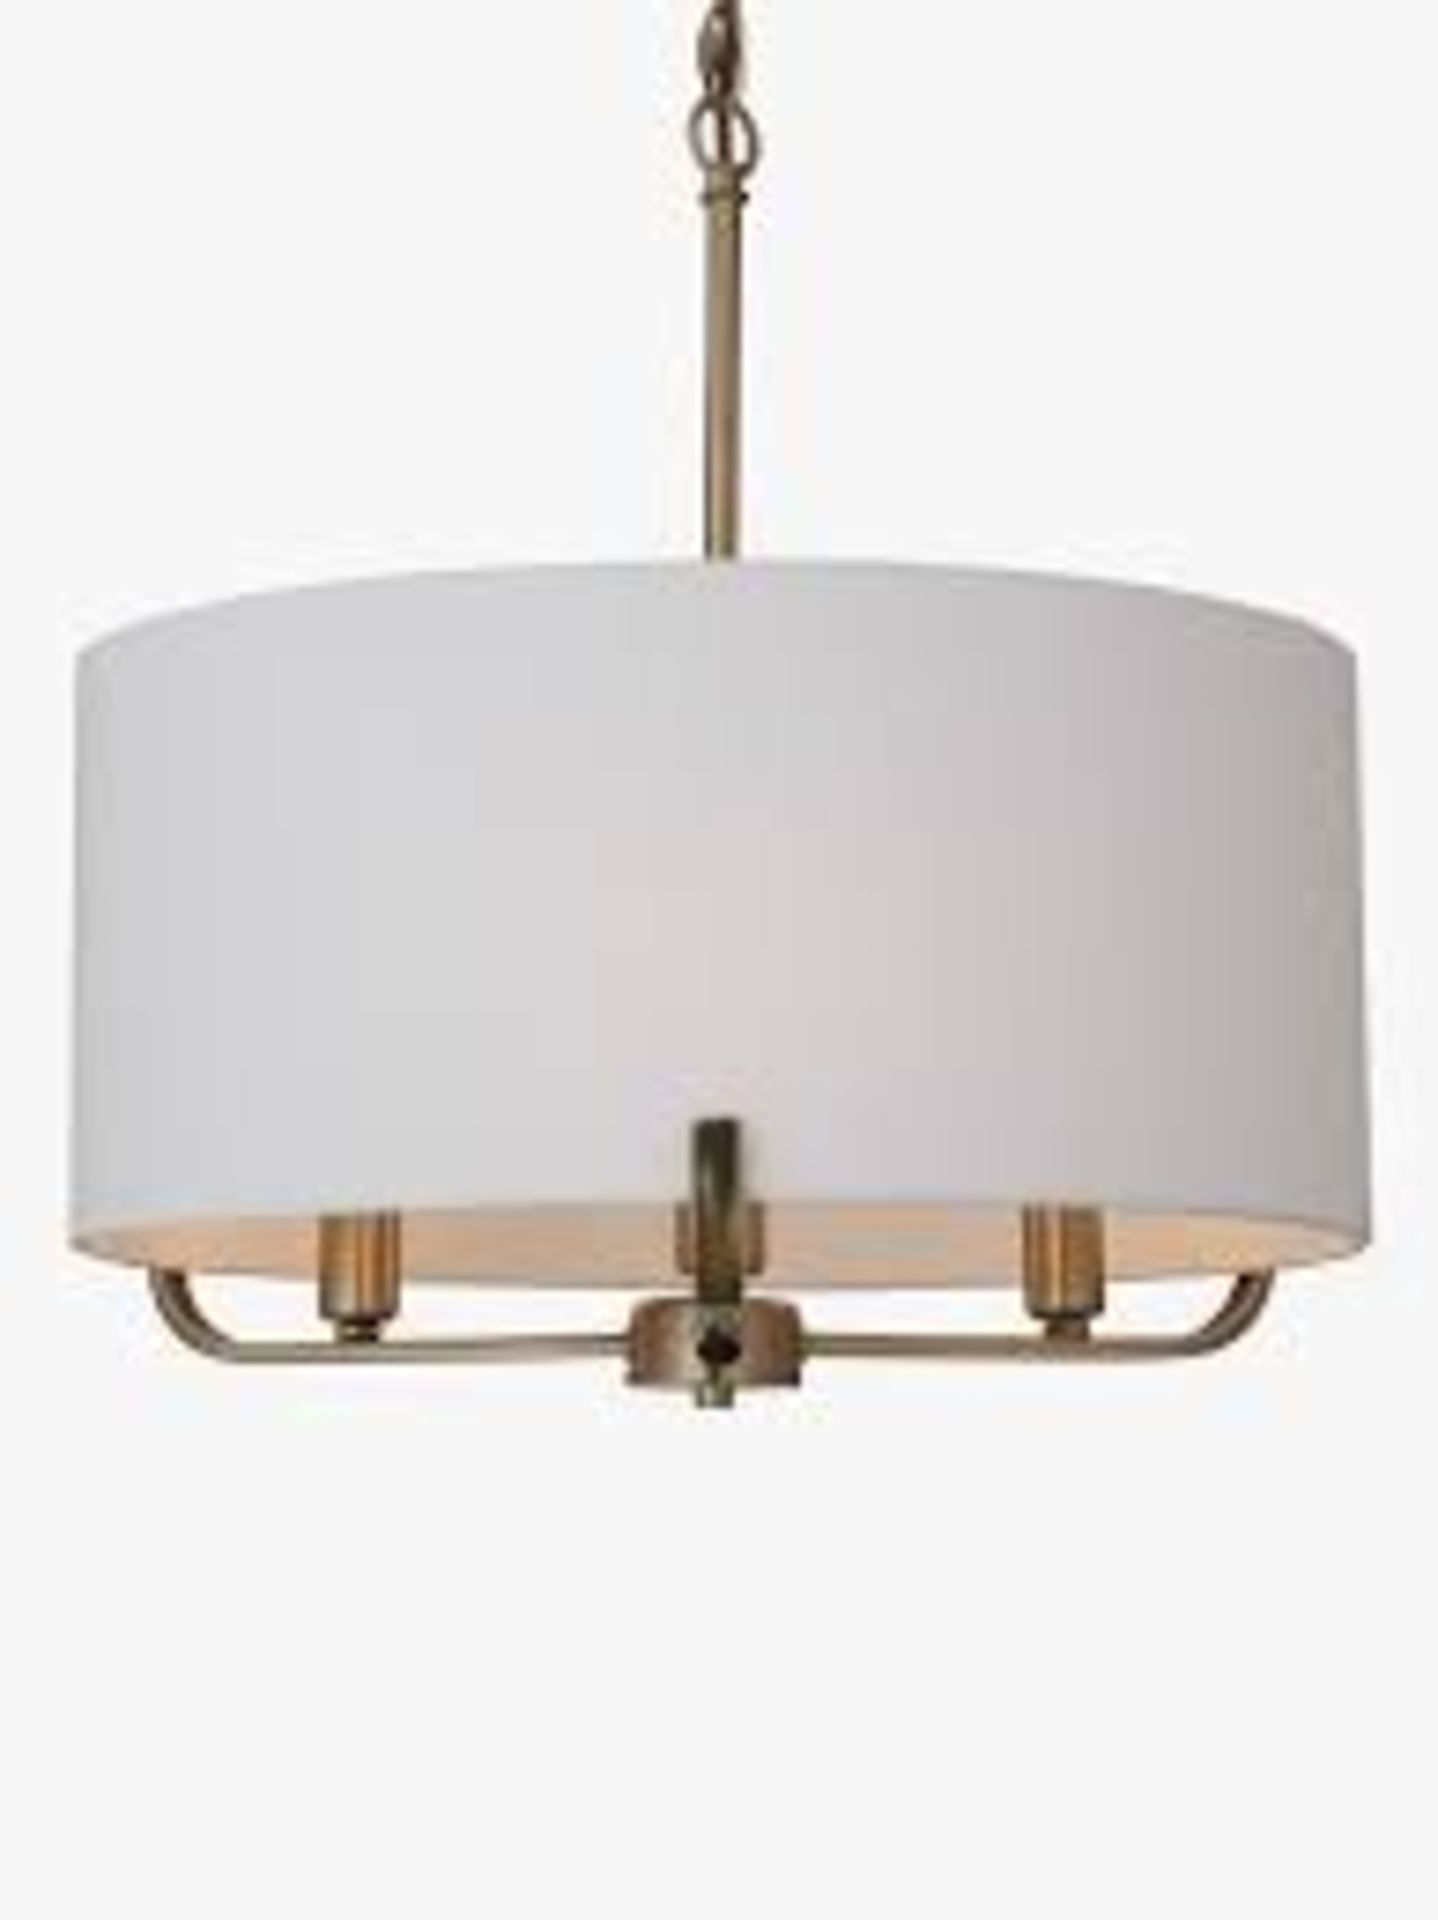 Boxed Jamieson Satin Nickel Finish Ceiling Light Pendant RRP £150 (2526157) (Viewing/Appraisals